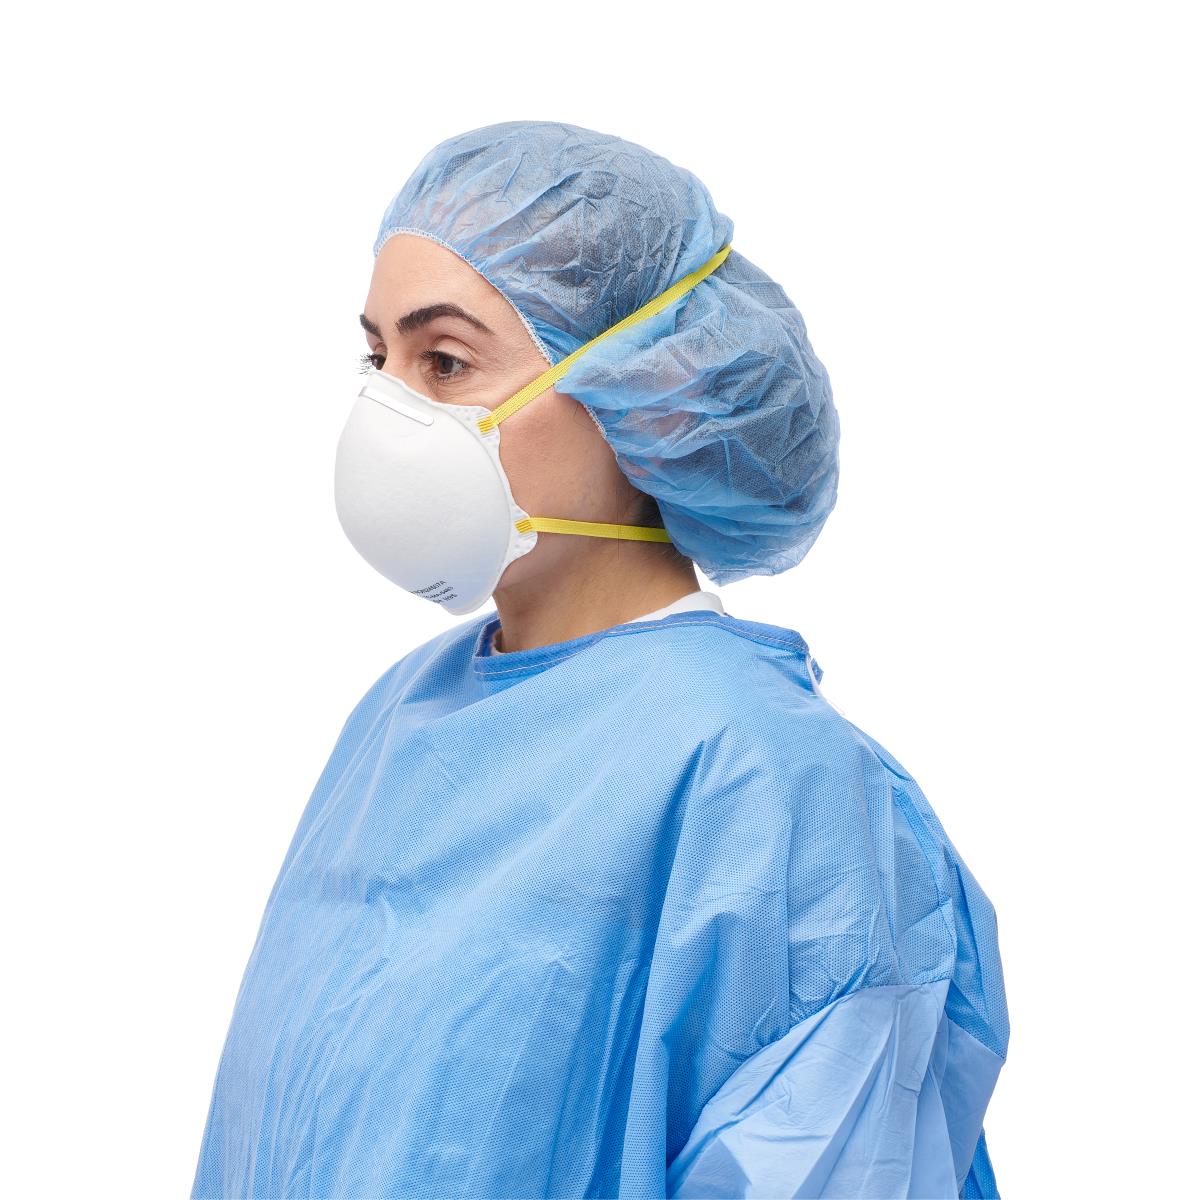 N95 Cone-Style Particulate Respirator Mask - Medline